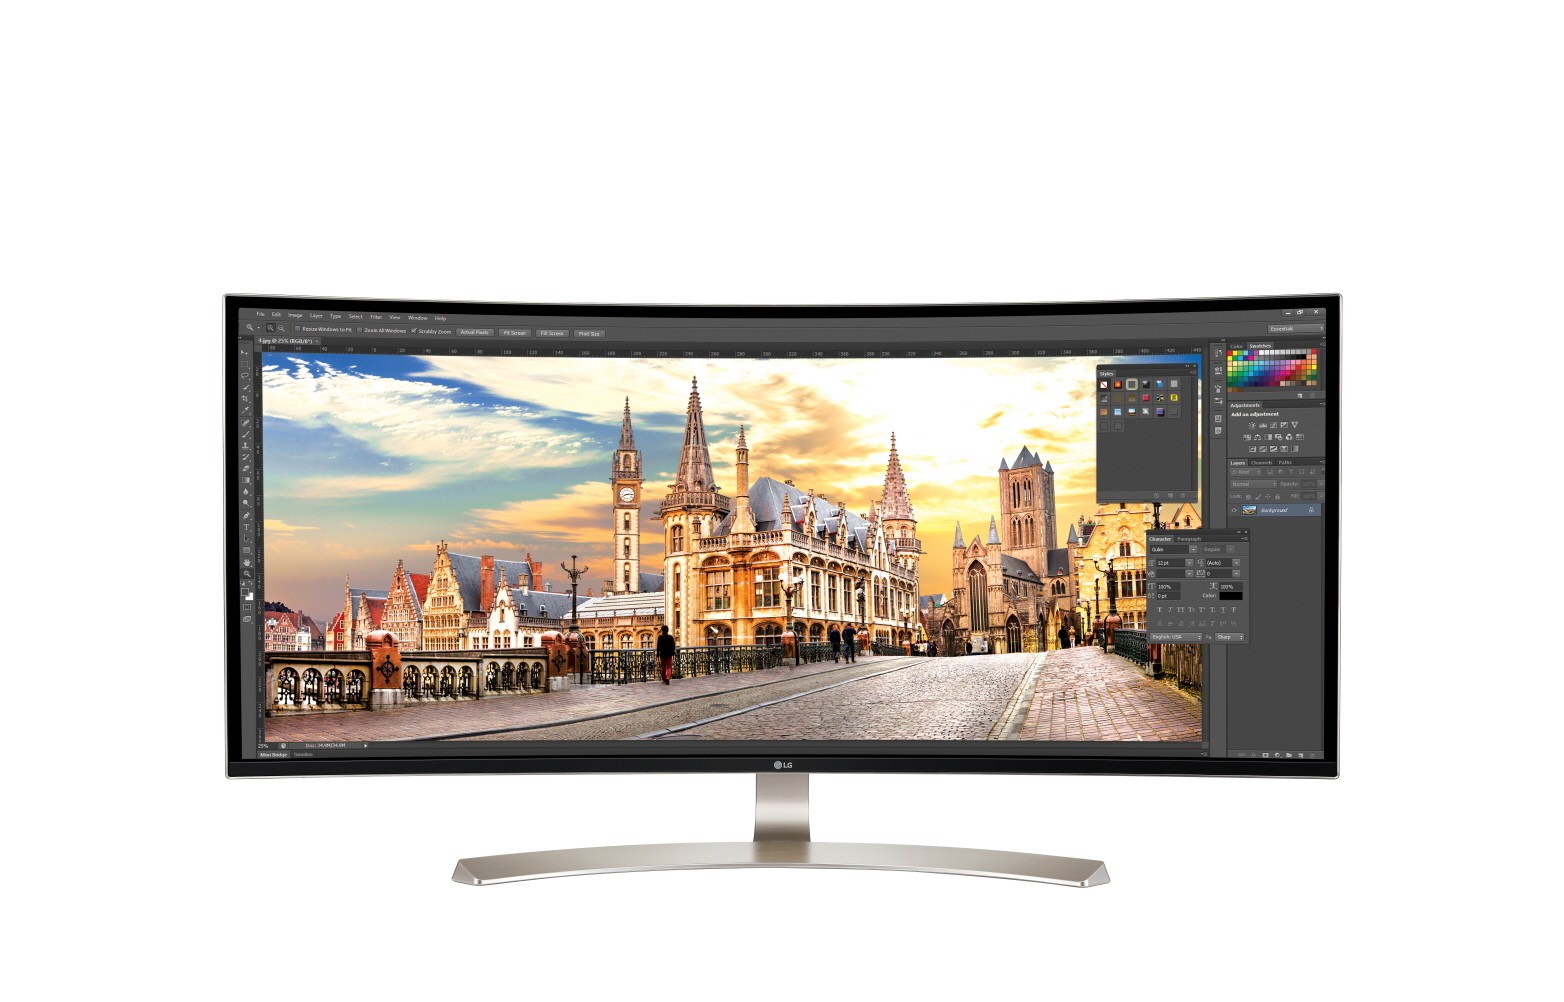 Best PC Monitors [October 2016]: Samsung, LG, Viewsonic, Acer, and More!